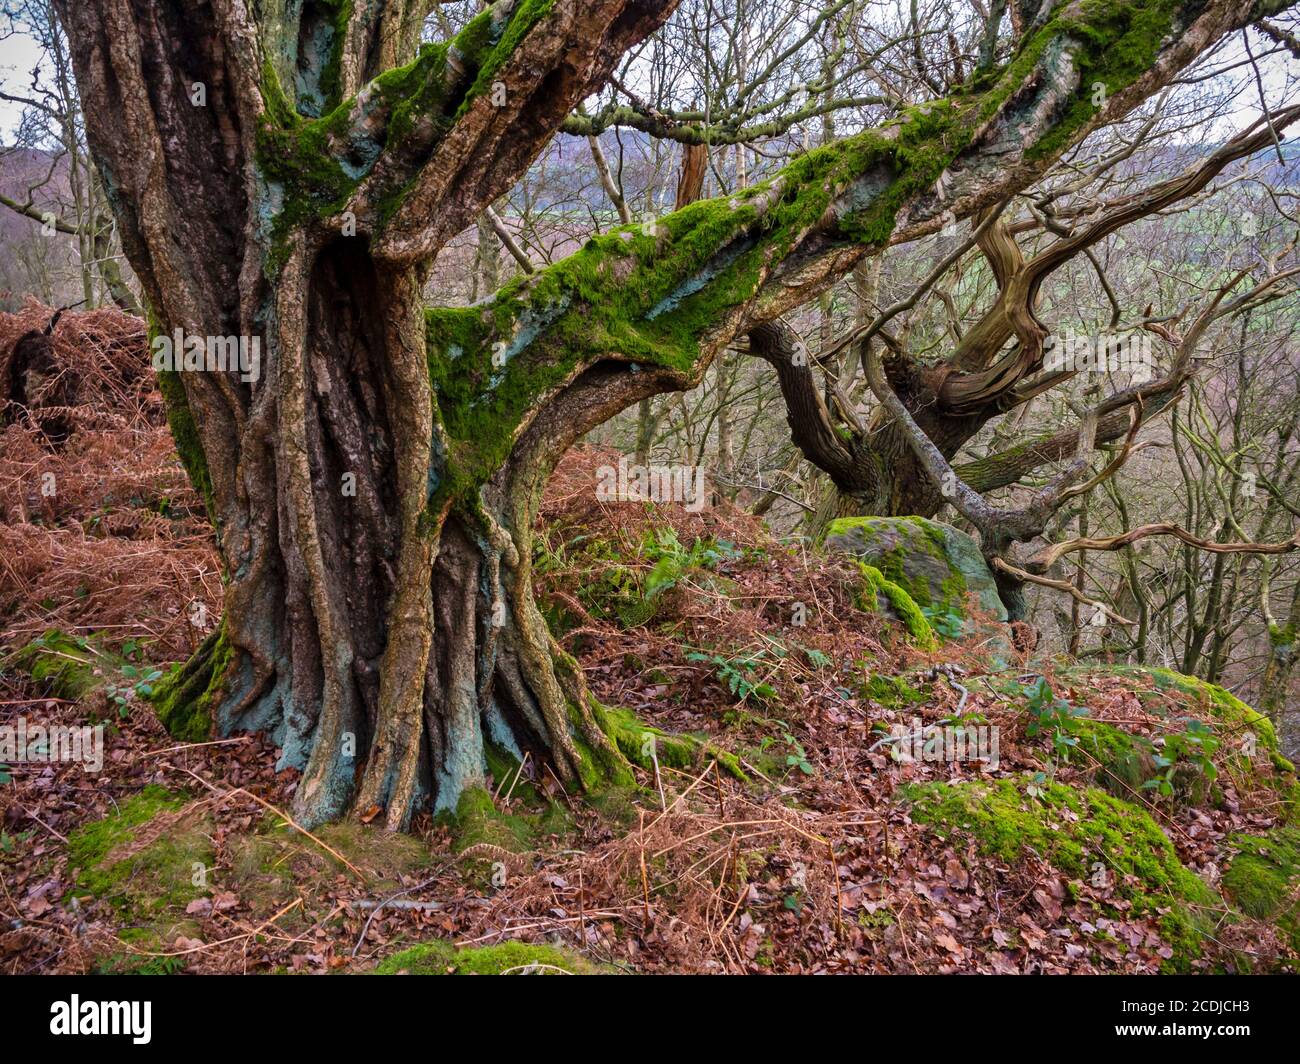 Old twisted trees in woodland with moss covered rocks and branches. Stock Photo